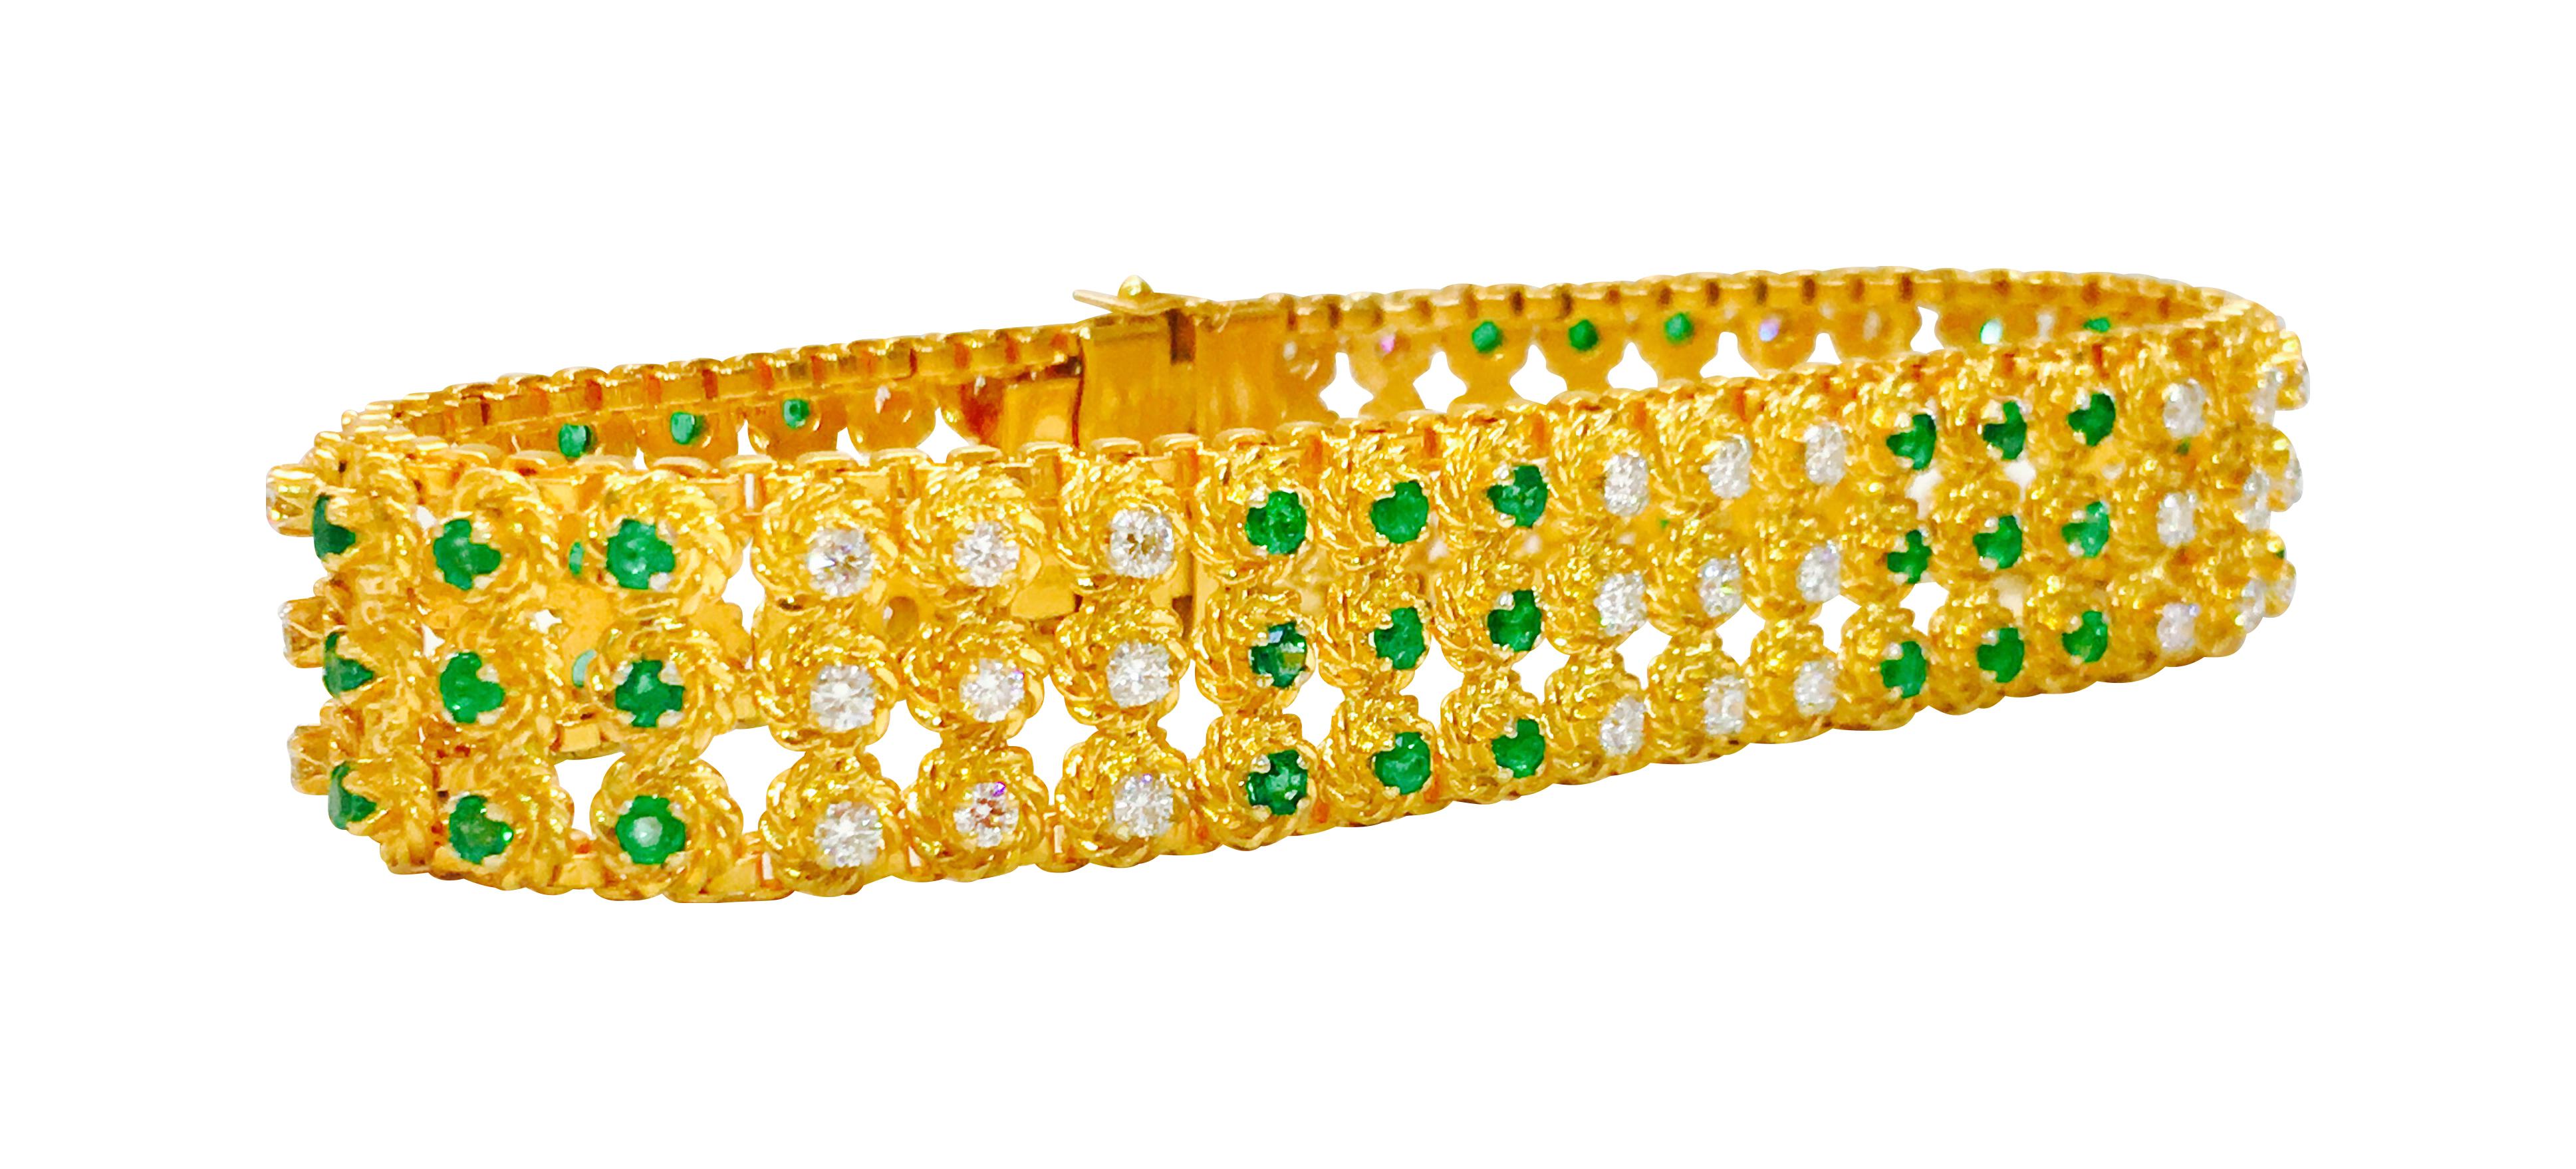 This bracelet is made of shiny 18k yellow gold and has beautiful round diamonds totaling 2.50 carats. The diamonds are super clear (VVS clarity) and have a bright white color (E color). There are also 2.50 carats of round emeralds on the bracelet.